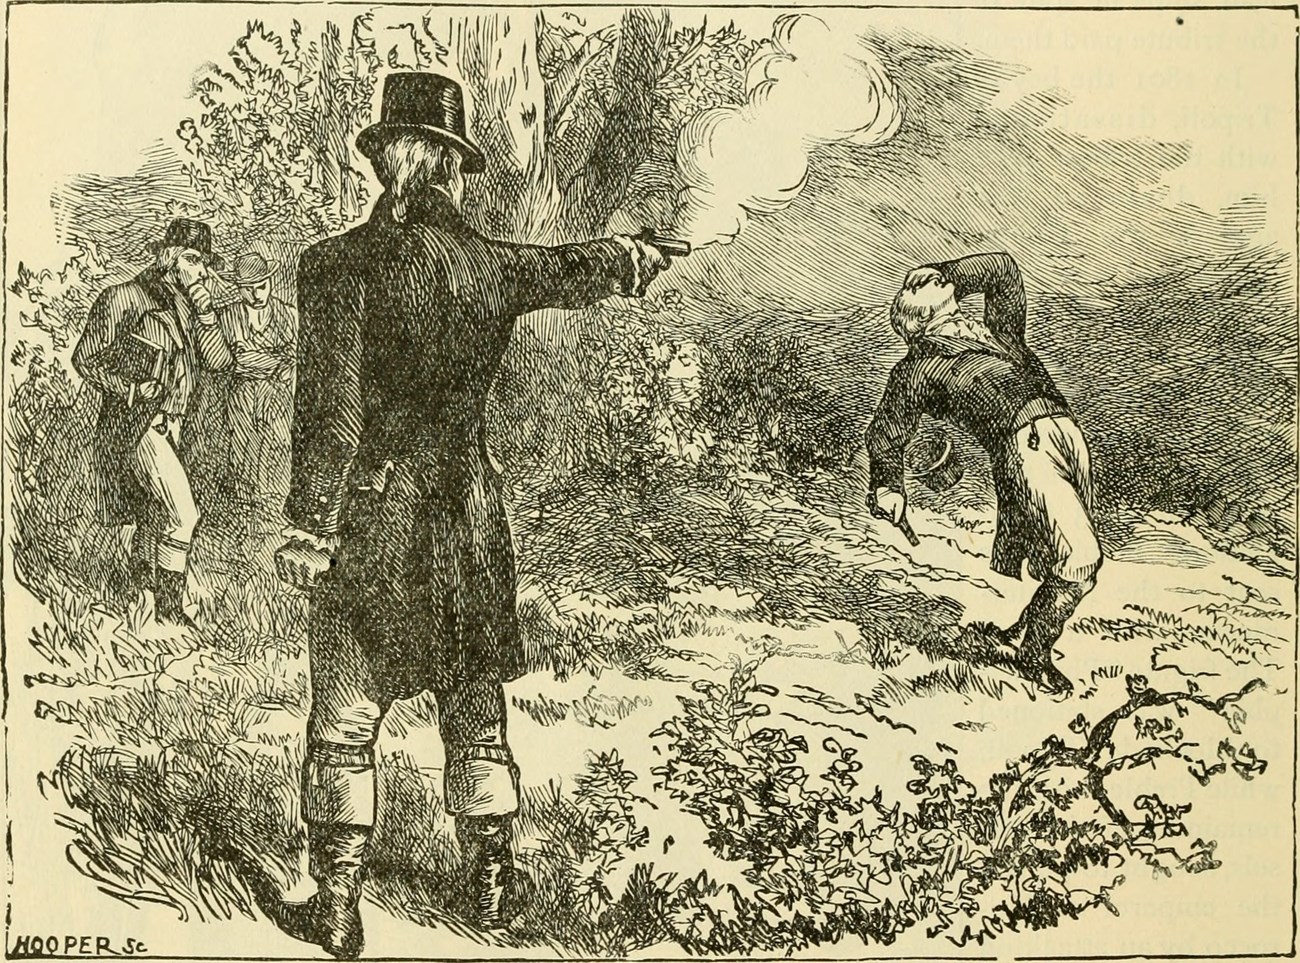 A black and white illlustration of two people pointing guns at each other.